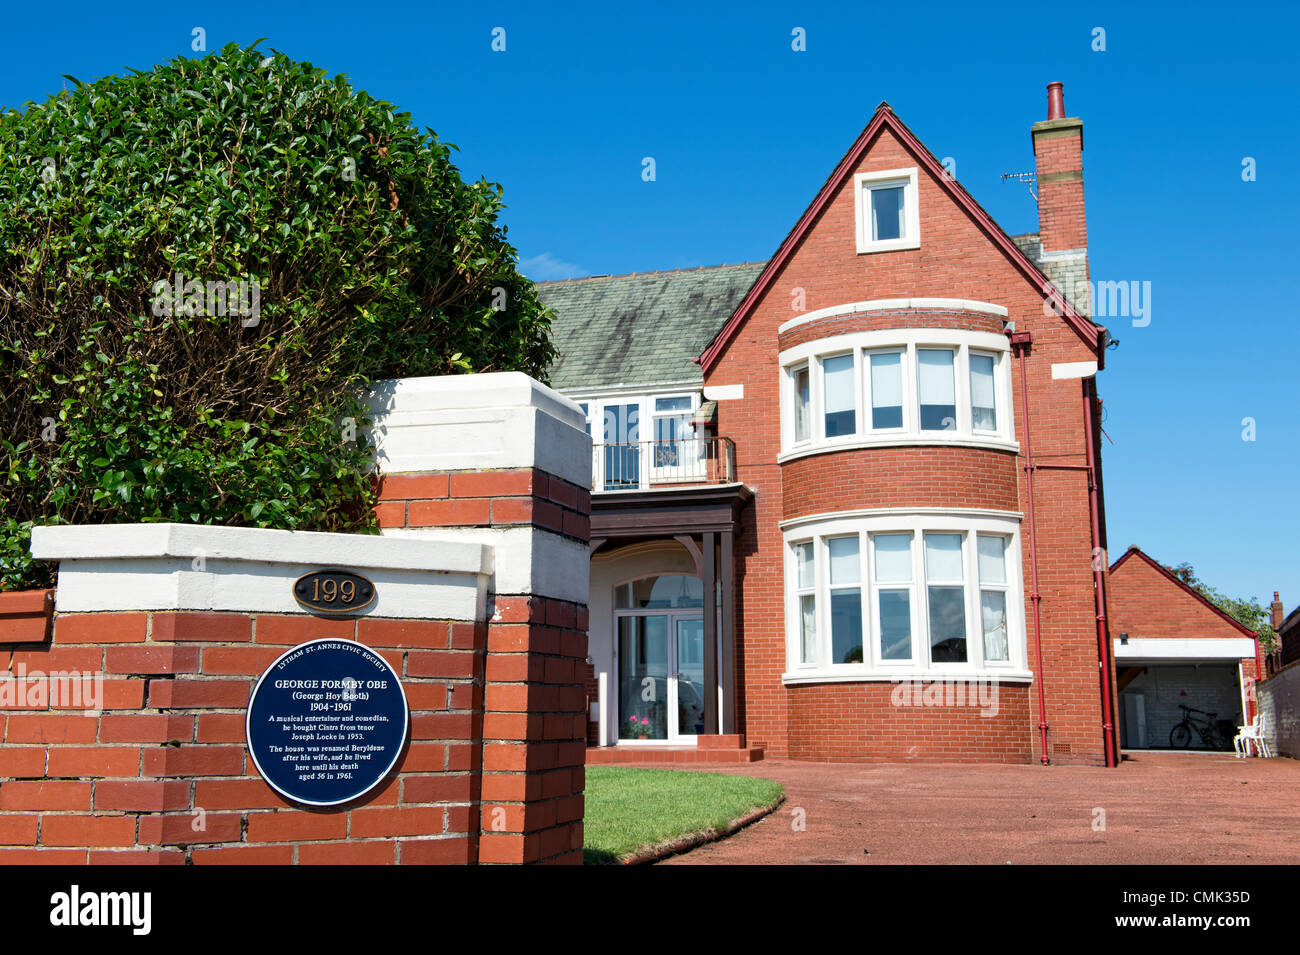 A blue plaque has been unveiled at entertainer George Formby's former home in Lytham St Annes, Lancashire. George Formby lived at the house, named Beryldene after his wife, for nearly ten years until his death in 1961.  Members of the George Formby Society performed at the unveiling on Inner Promenade in Fairhaven on 17th August 2012 Stock Photo